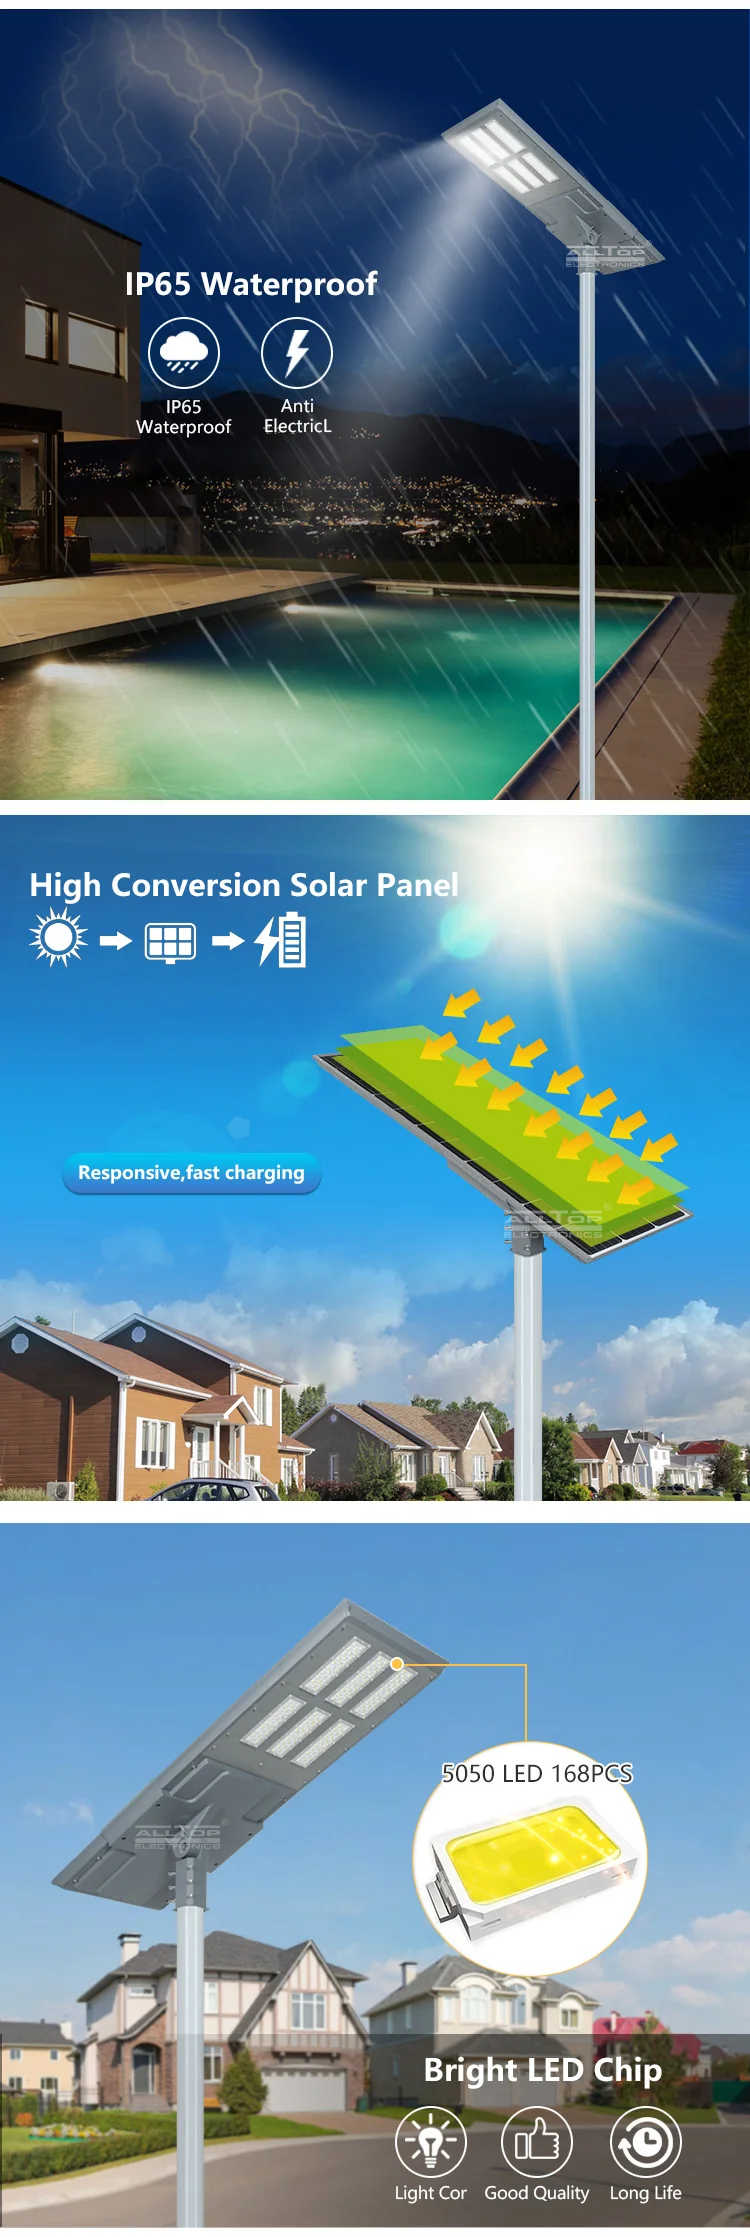 ALLTOP High power 3 years warranty ip65 200w integrated all in one solar led street light